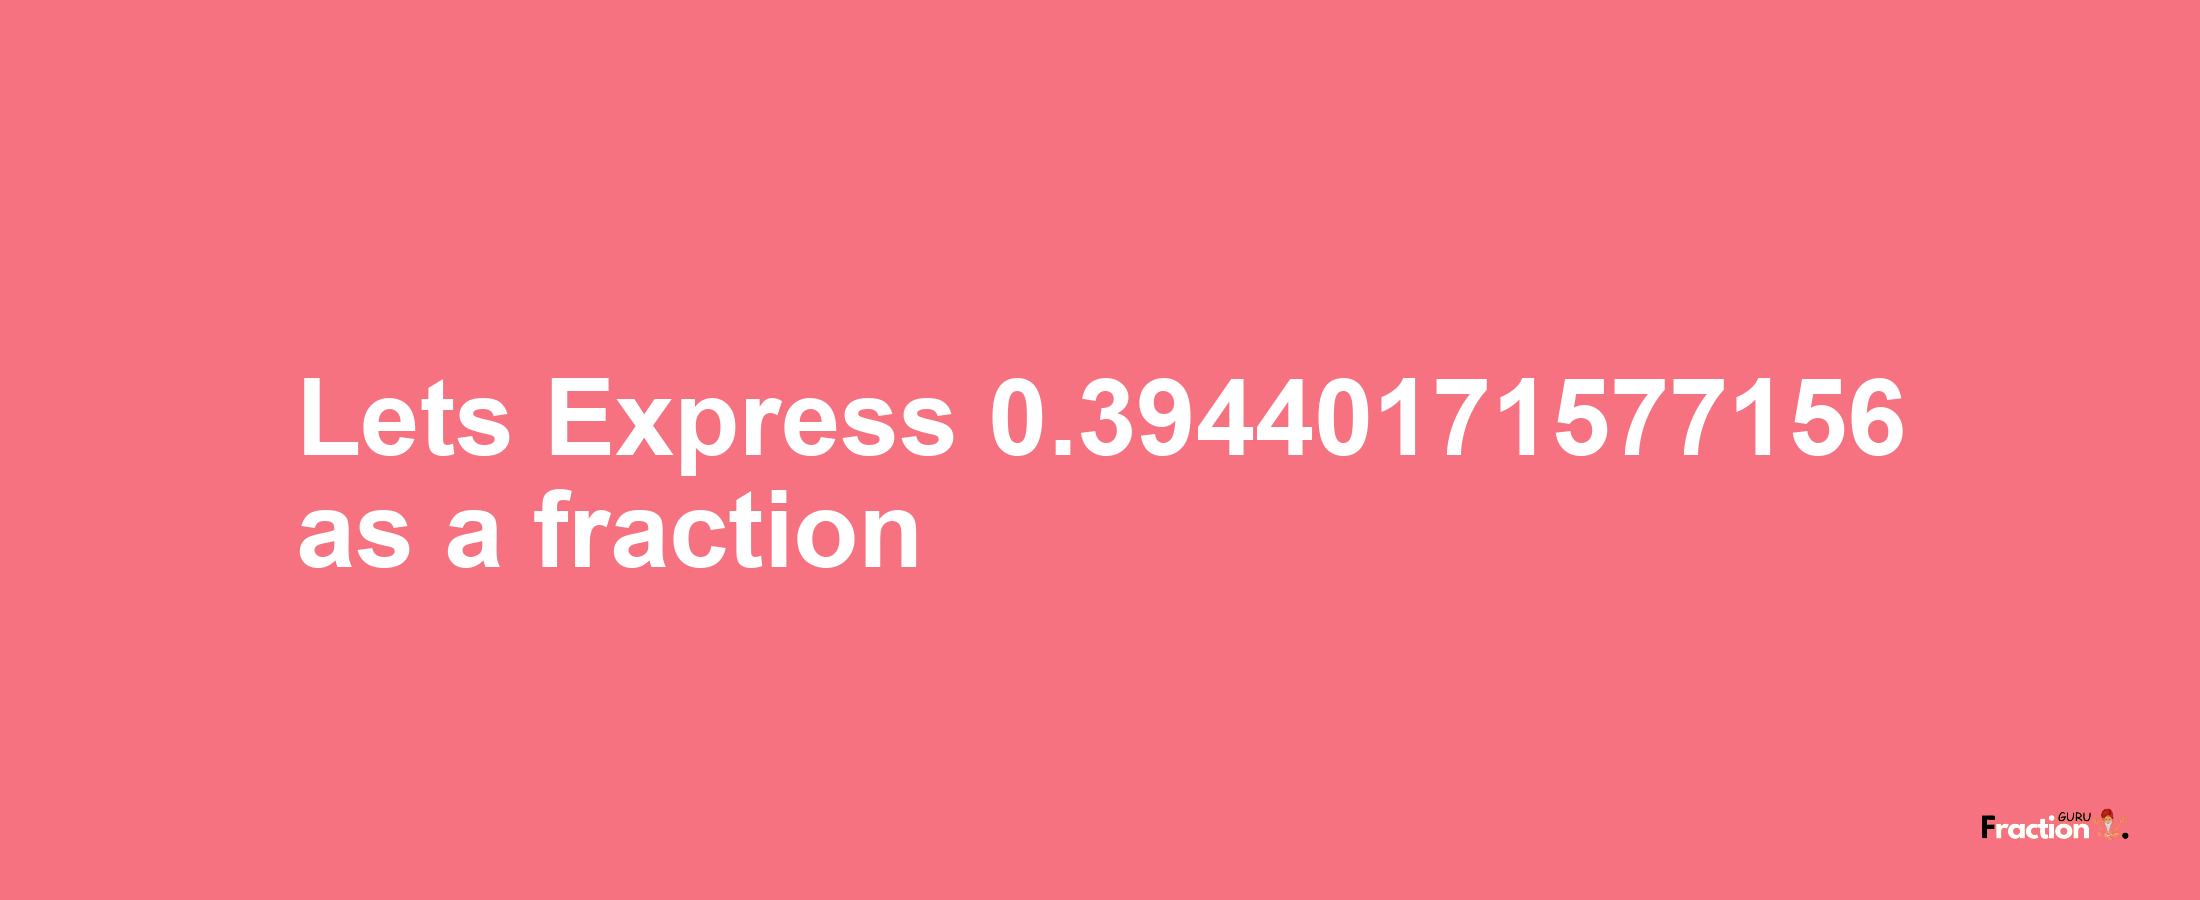 Lets Express 0.39440171577156 as afraction